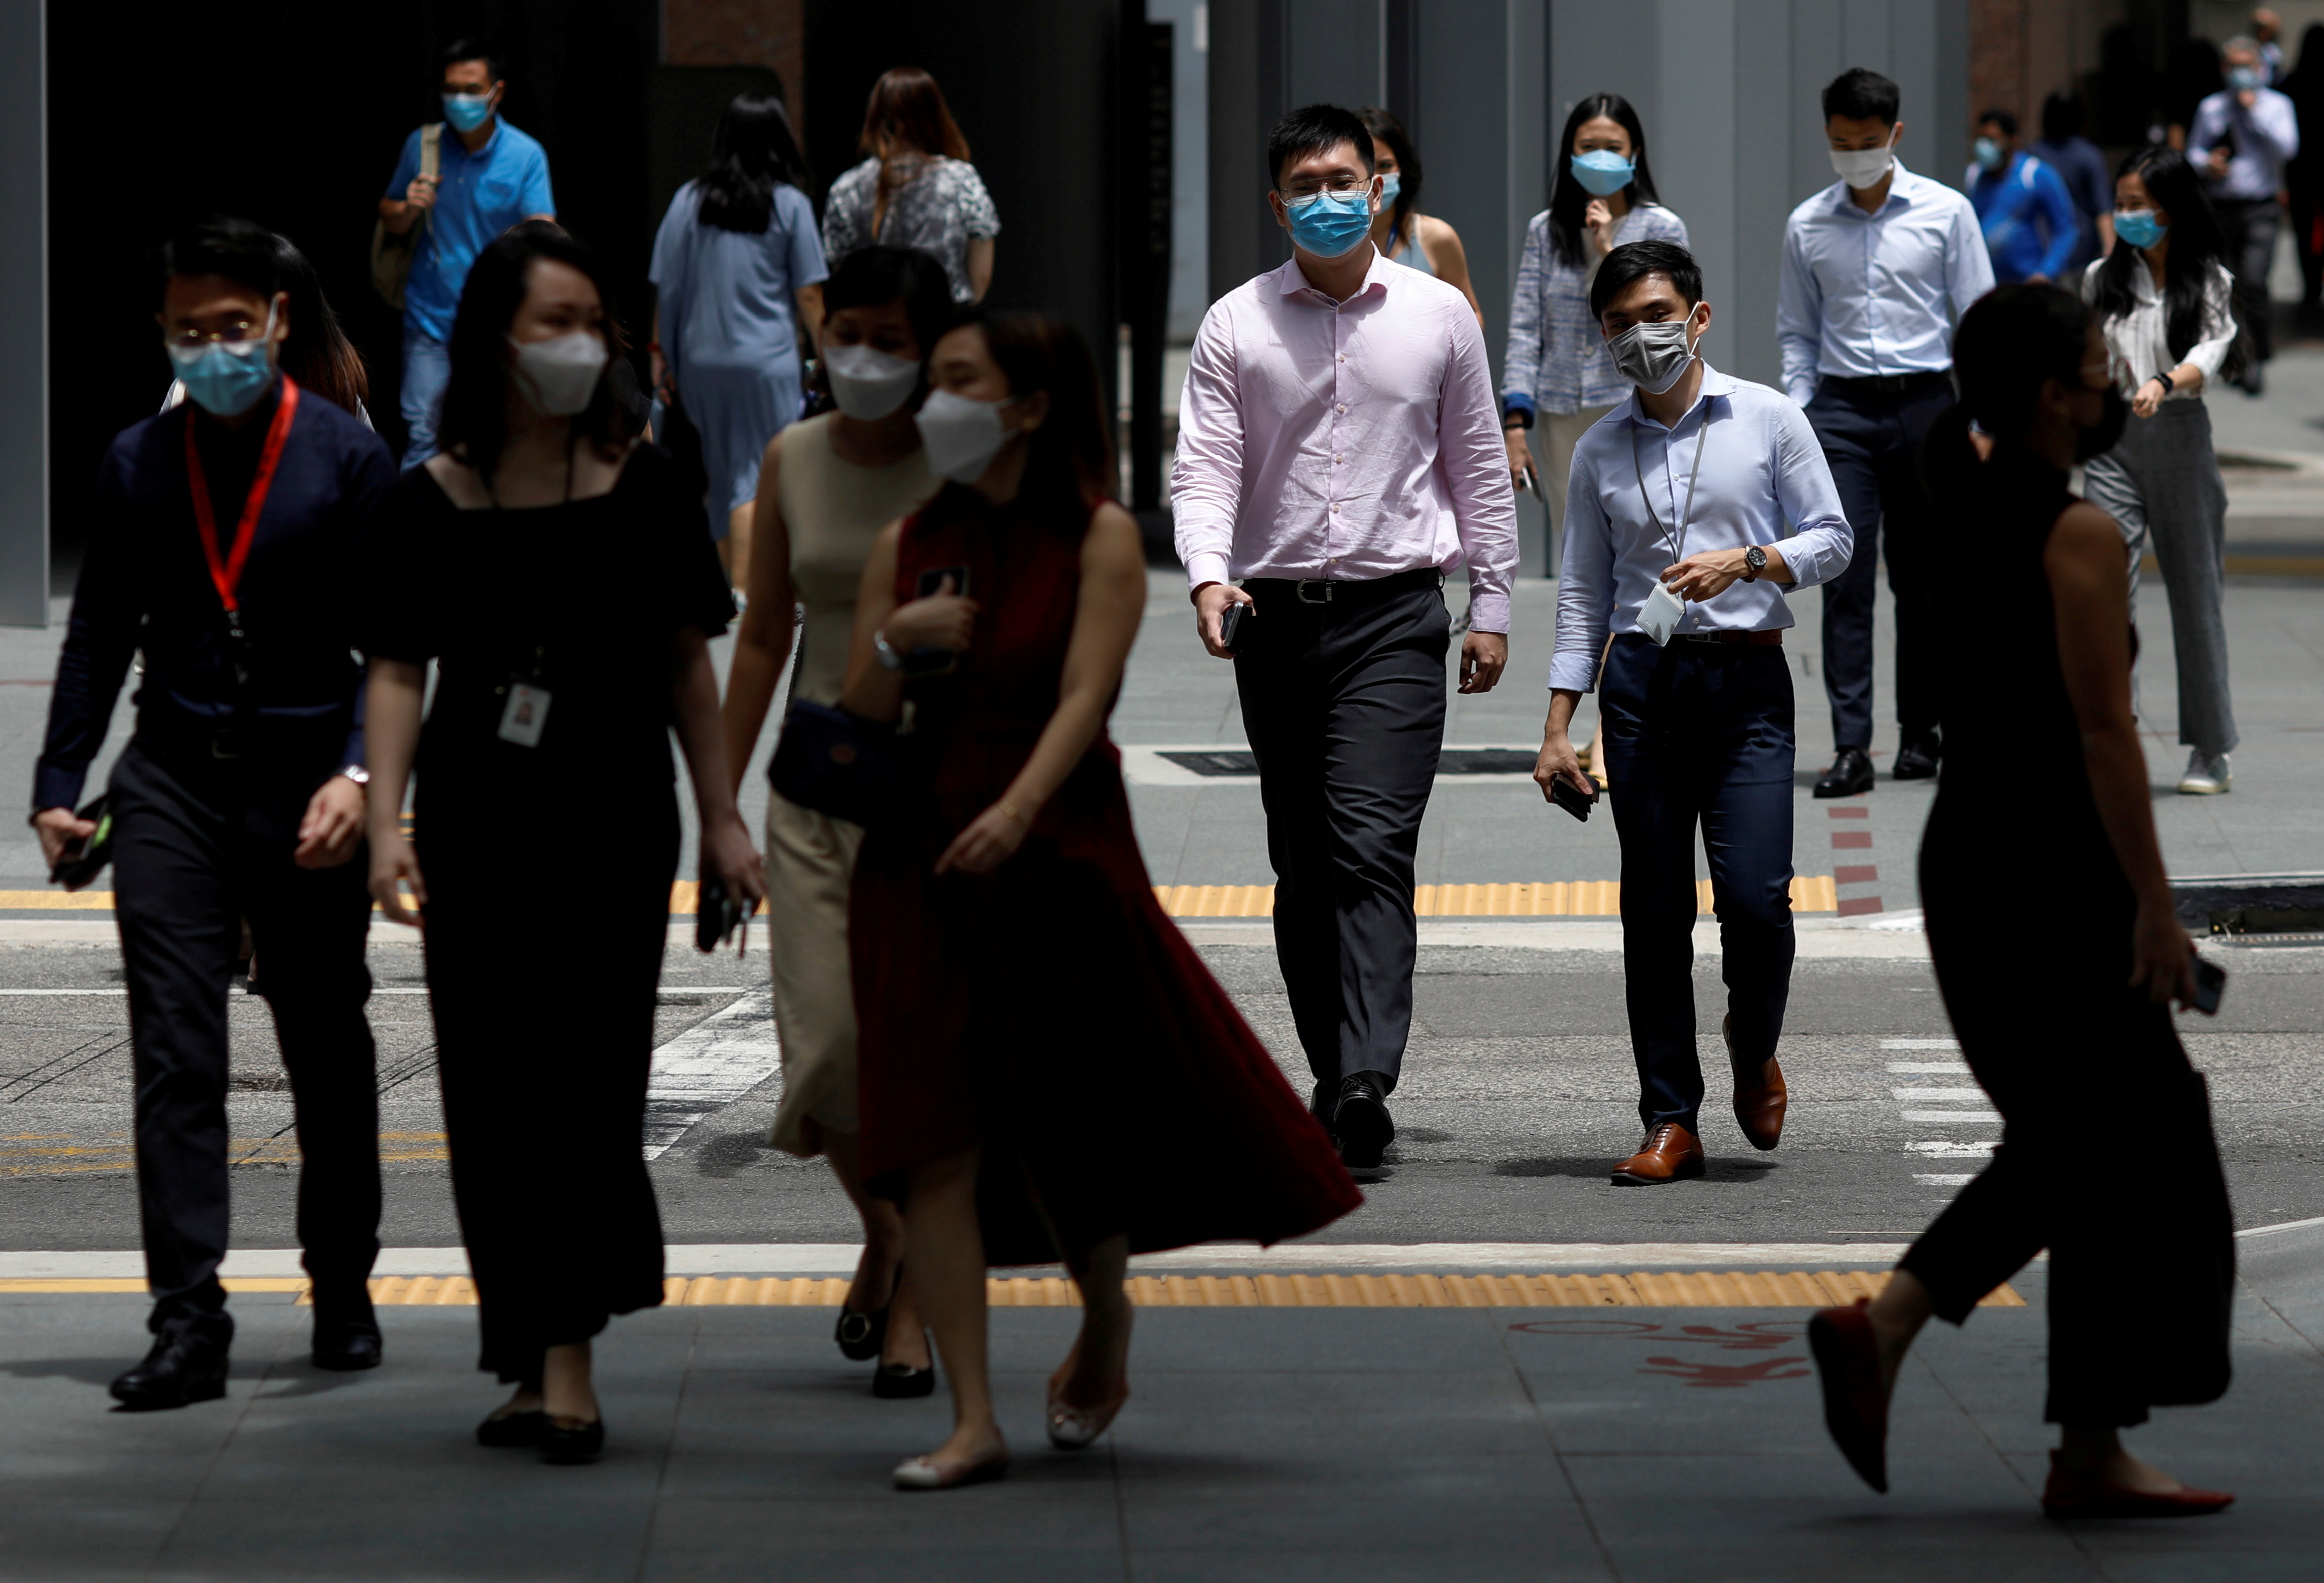 Office workers spend their lunch breaks at the central business district during the coronavirus disease (COVID-19) outbreak in Singapore September 8, 2021. REUTERS/Edgar Su